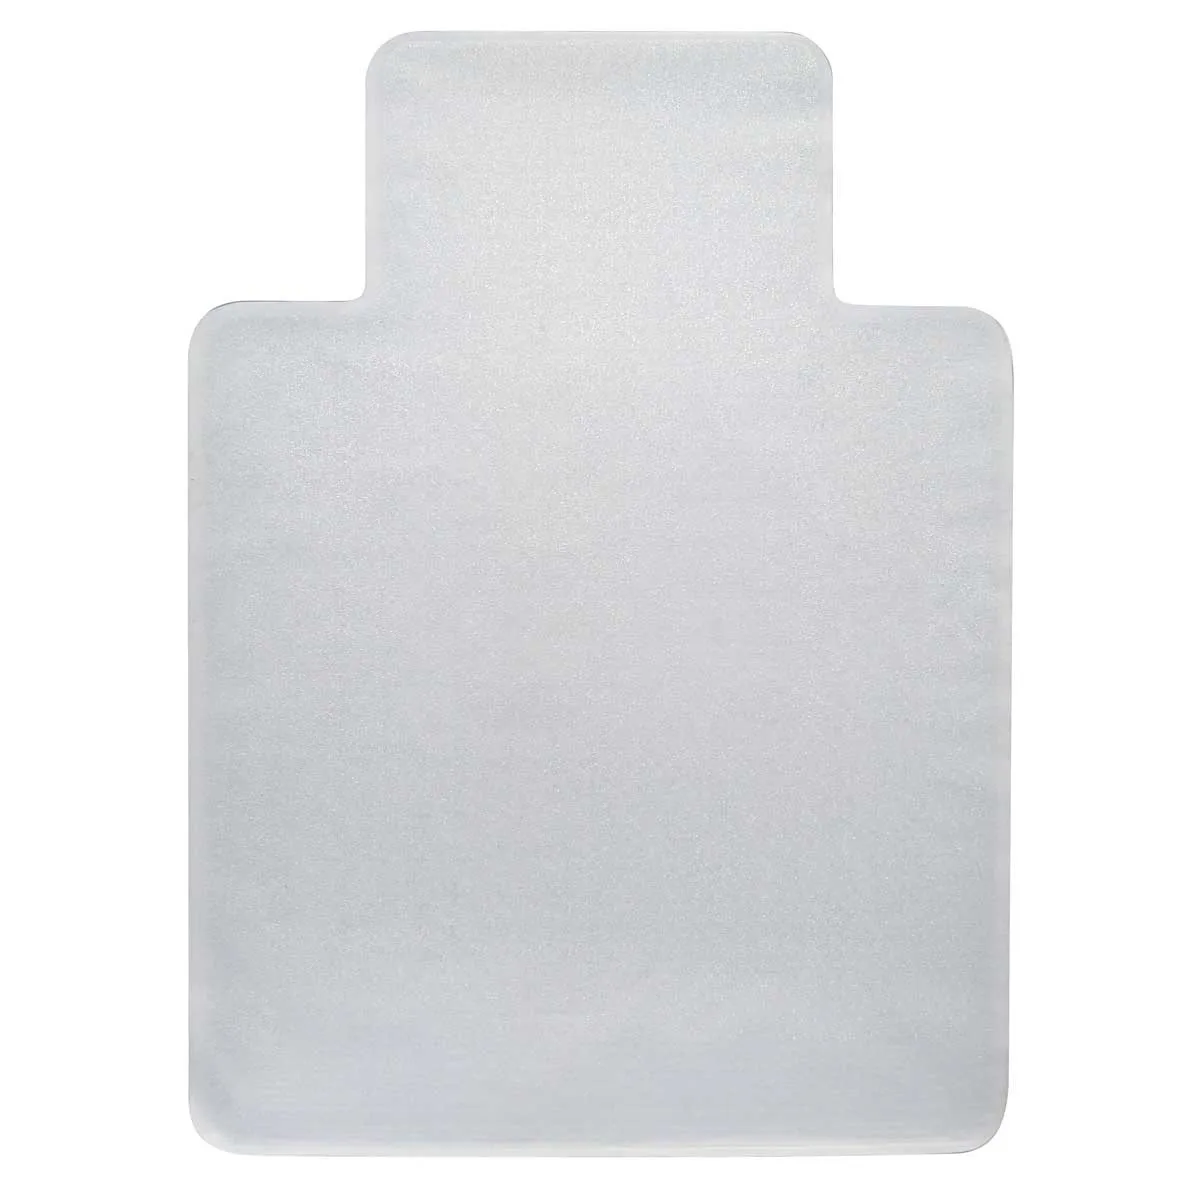 PVC Chair Mat Smooth Underside Small